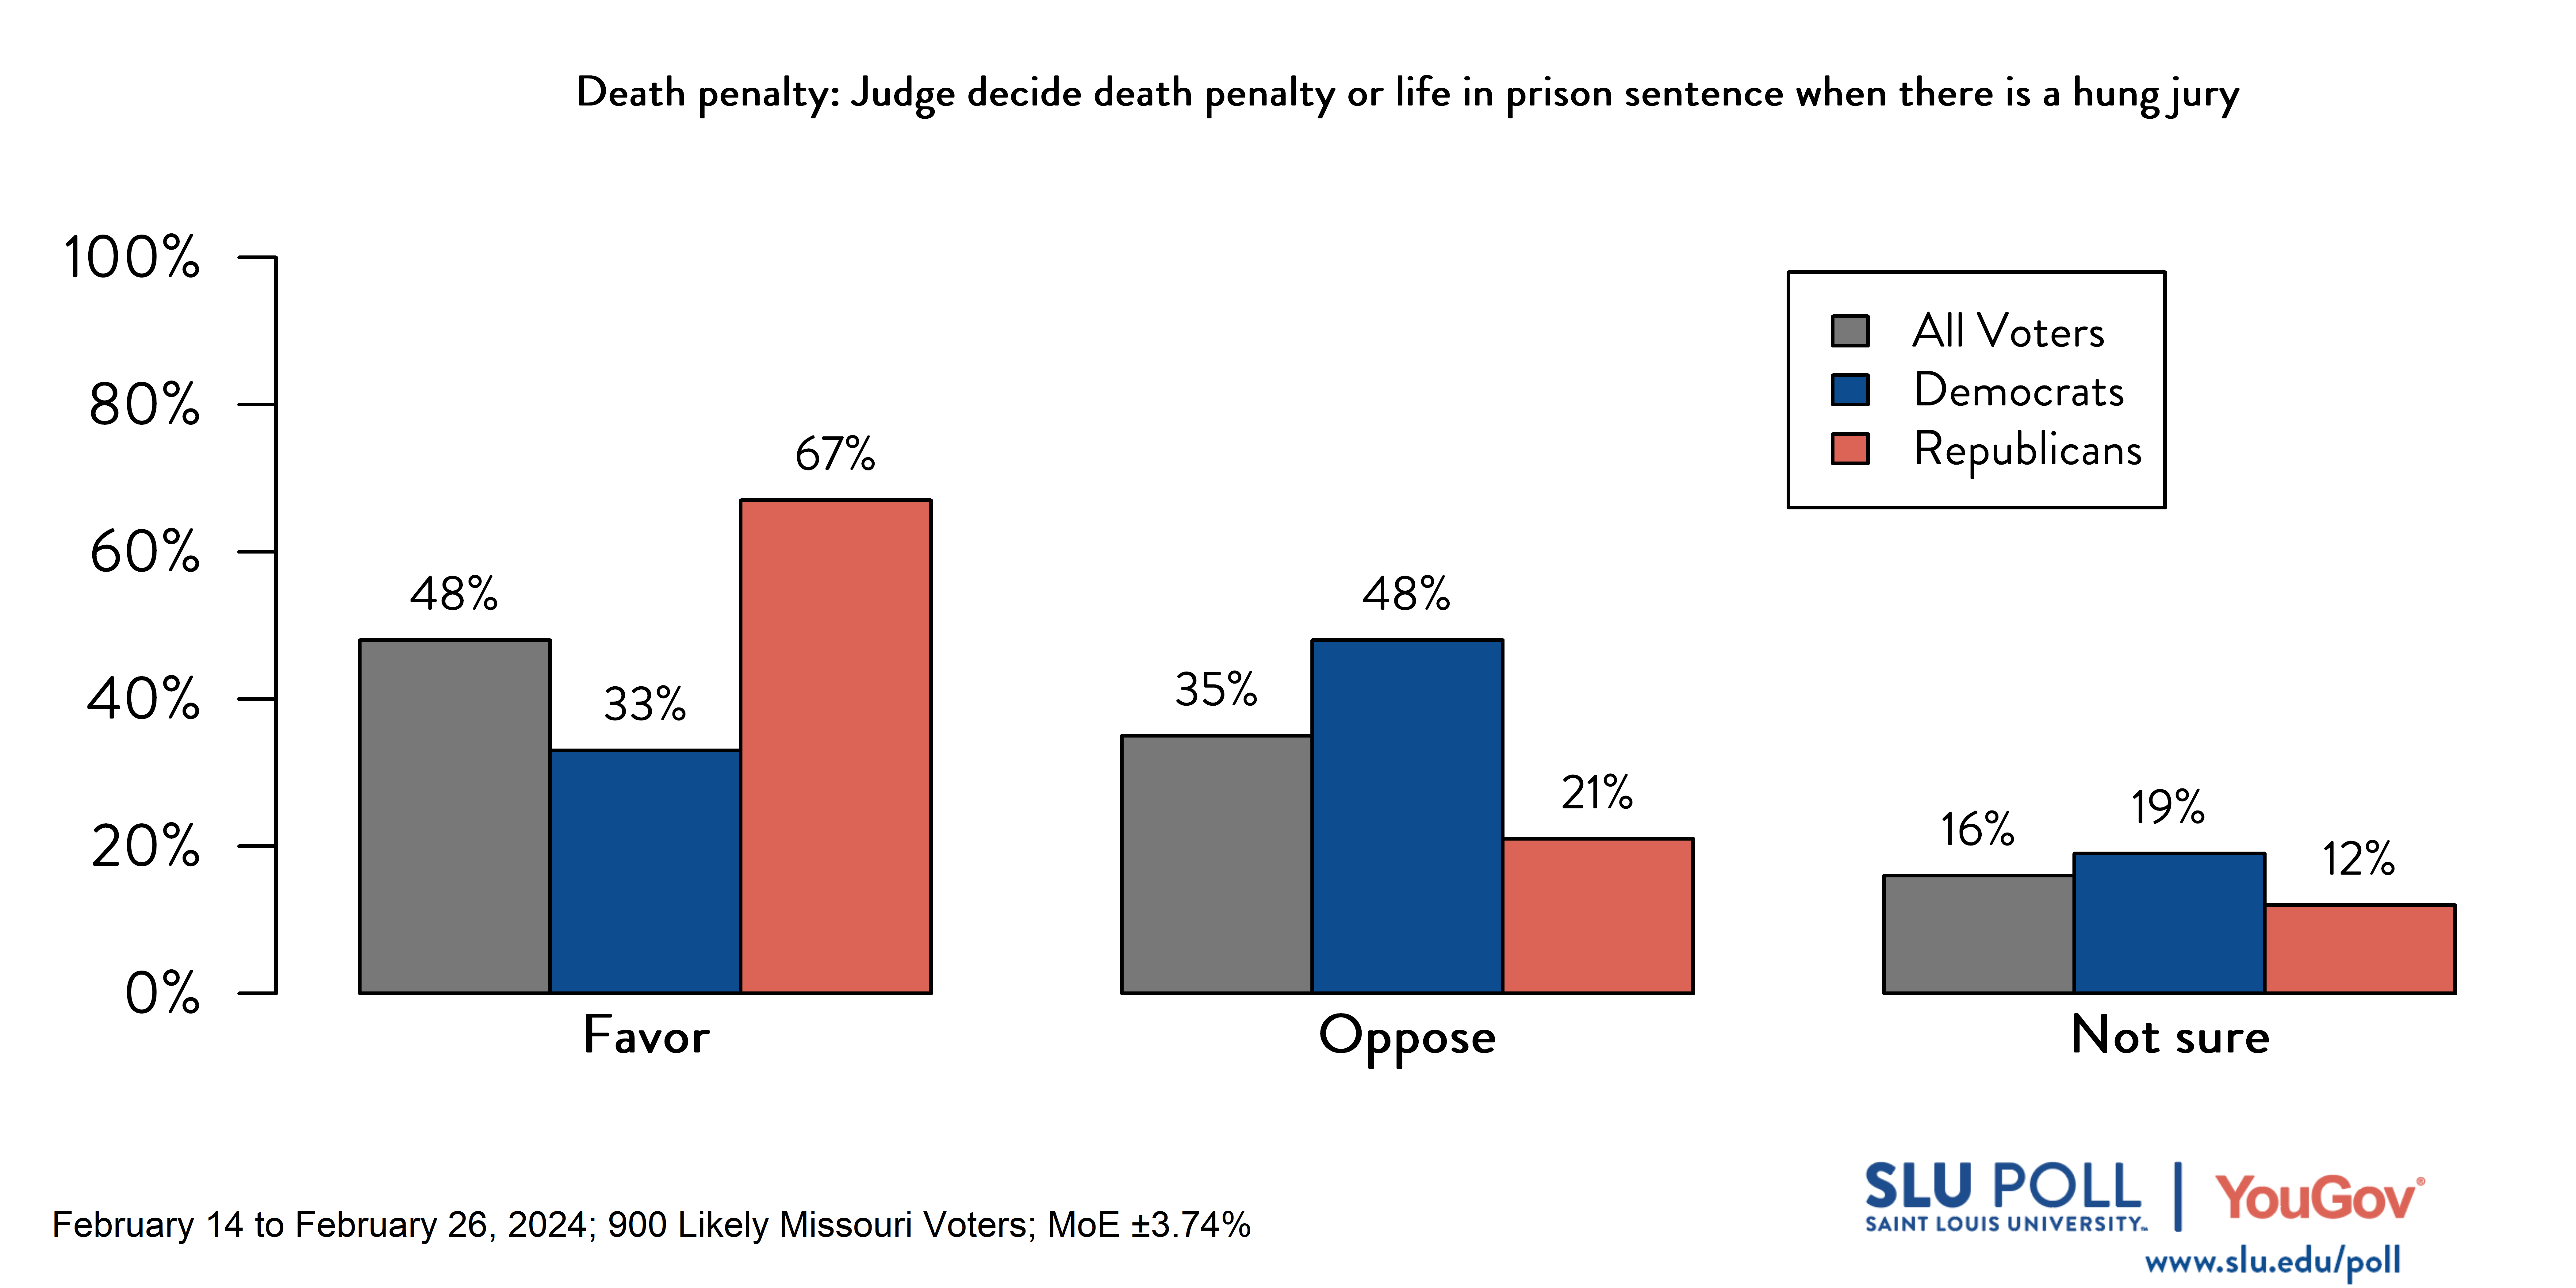 Slu/YouGov Poll results for death penalty hung jury question. Results available in caption.